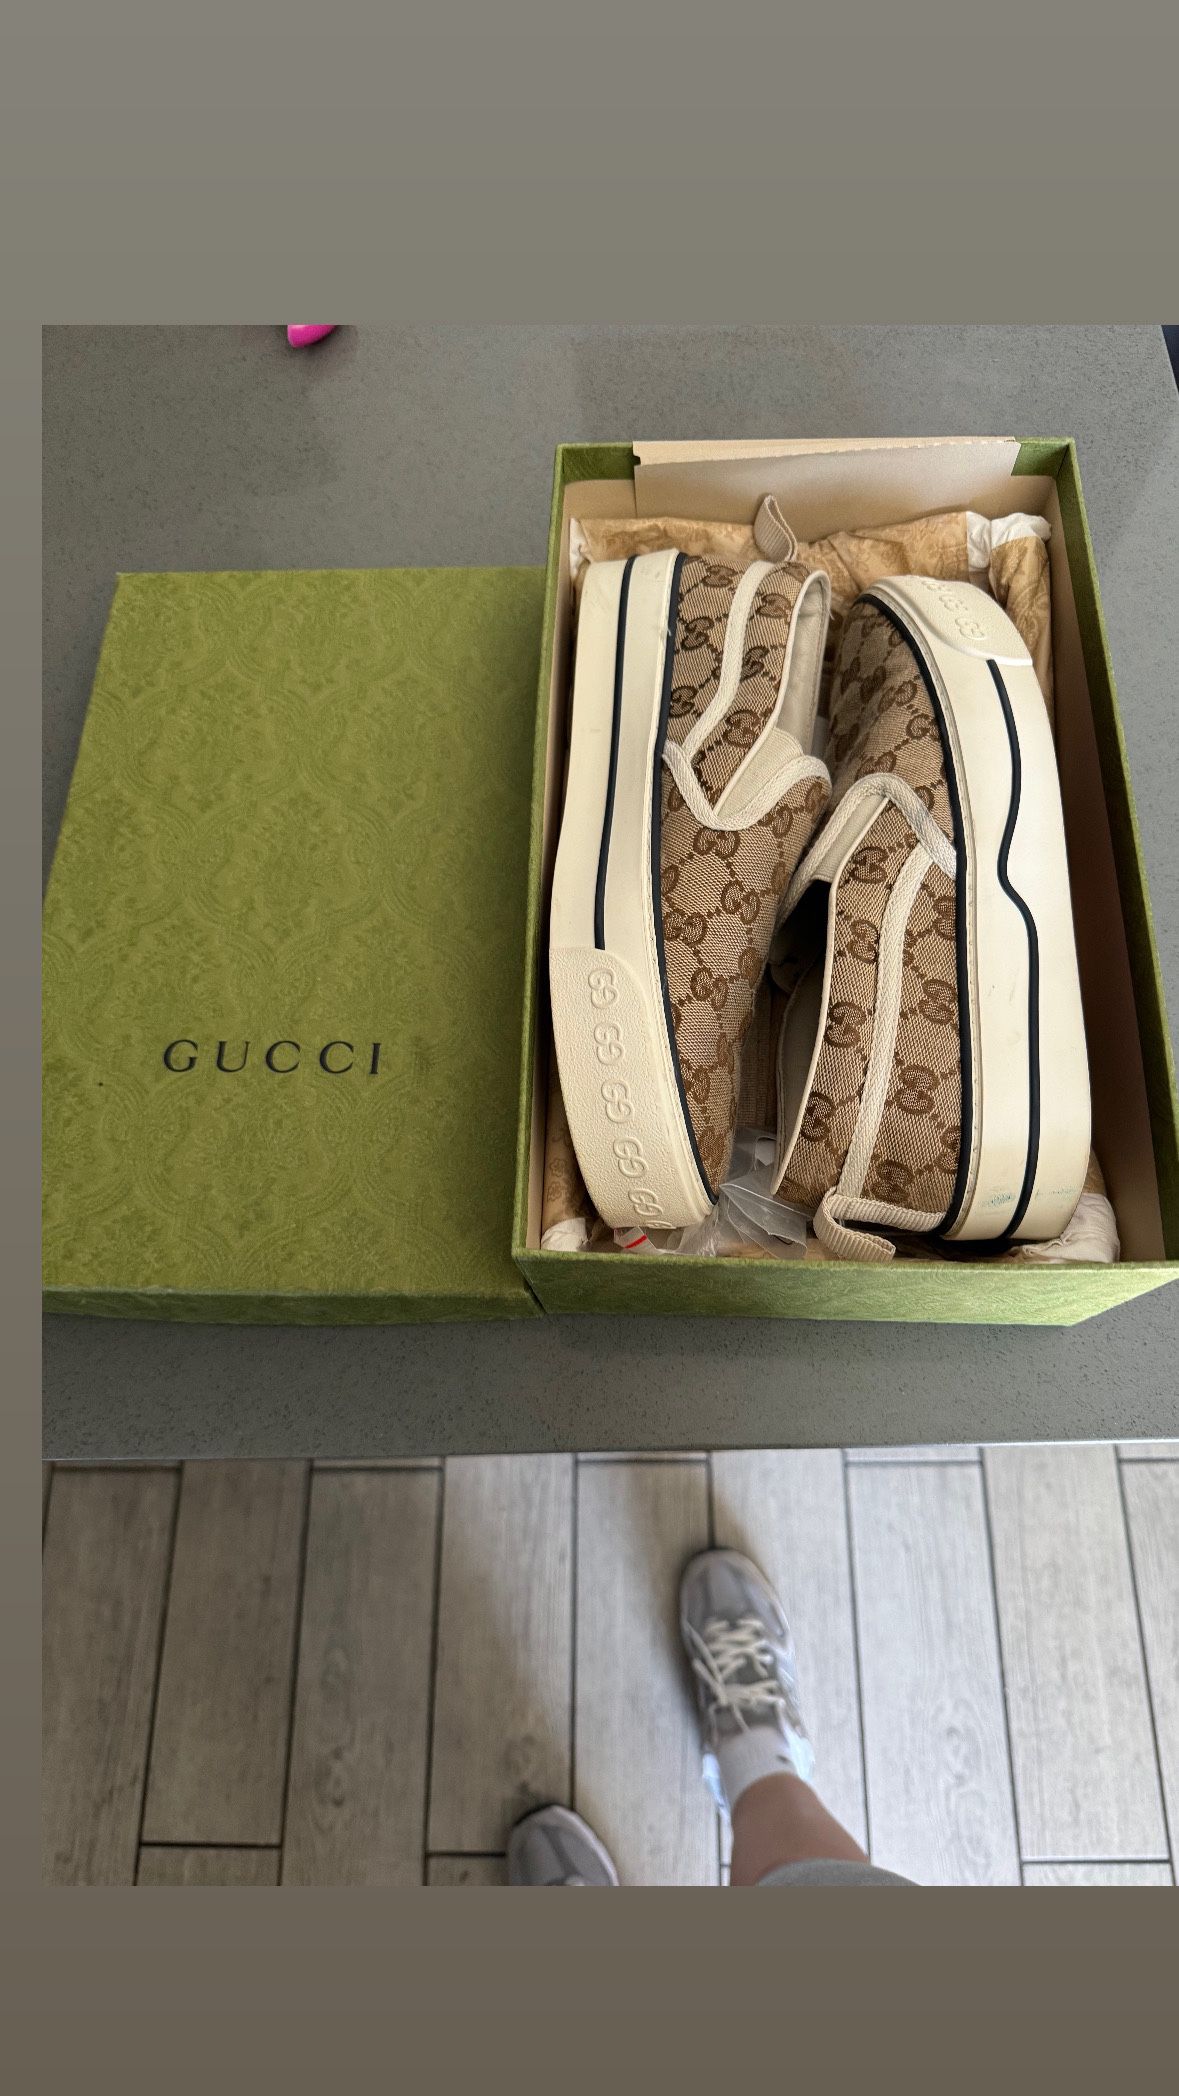 Gucci Slip On Shoes